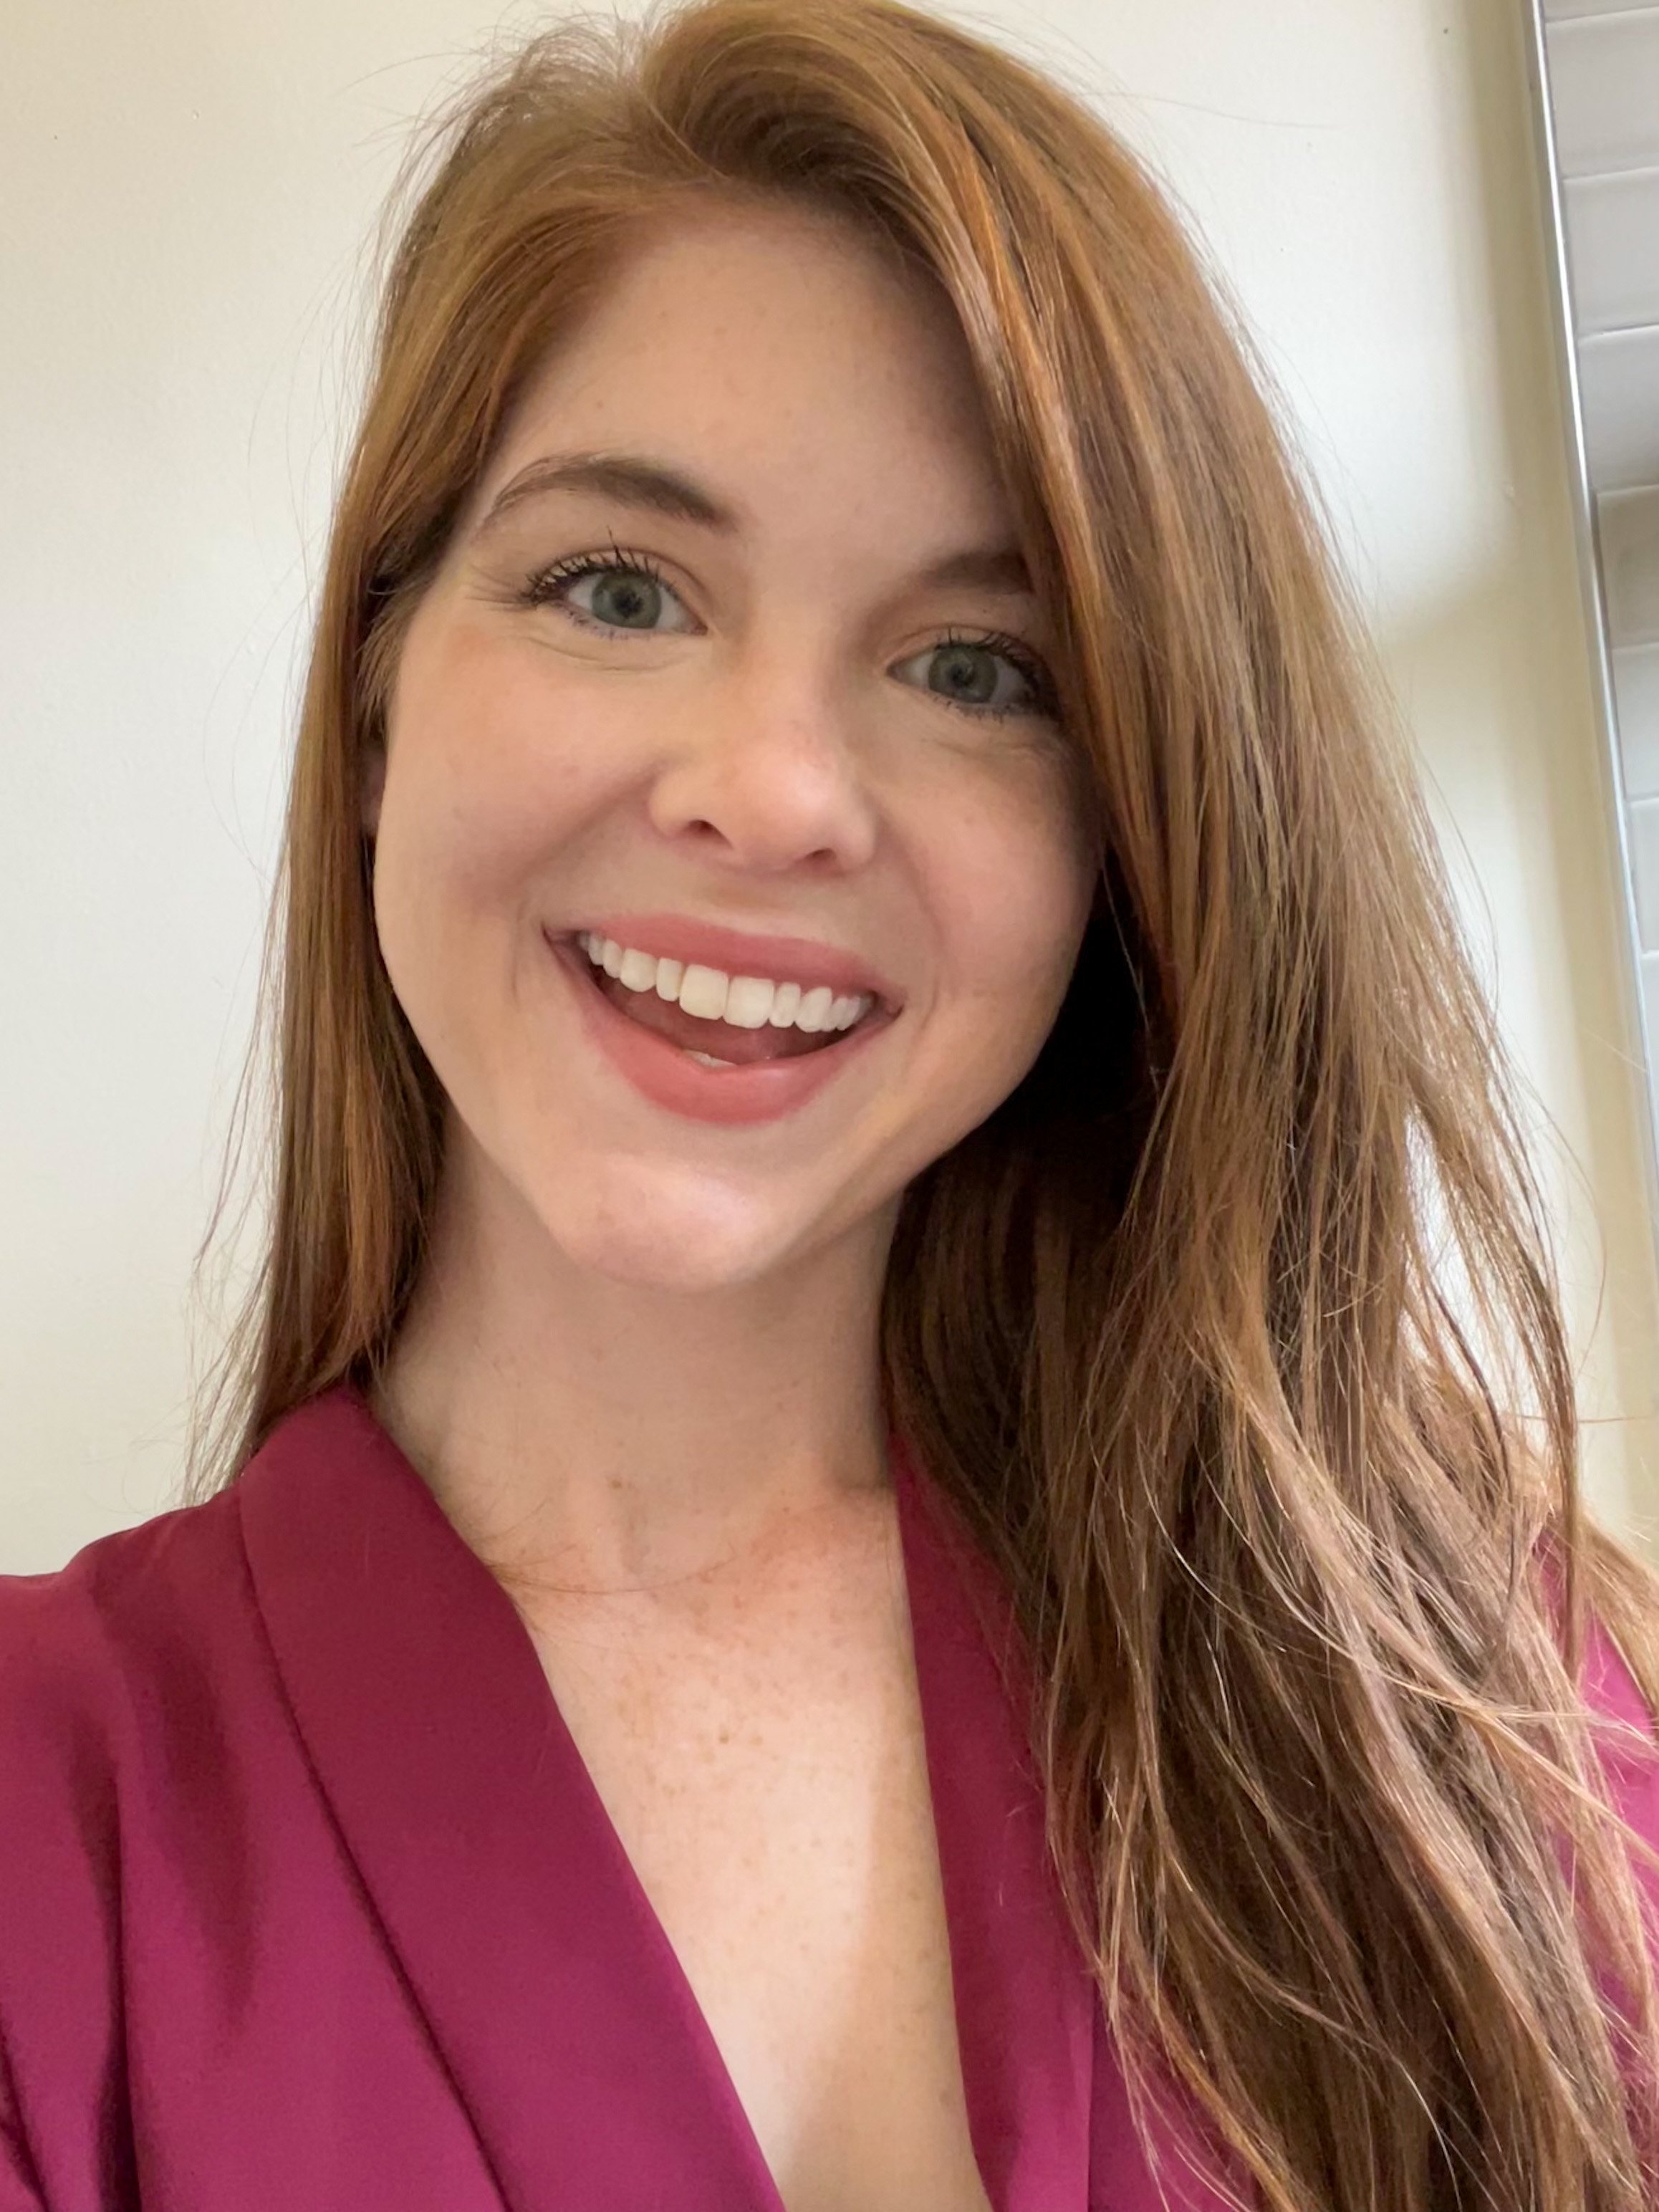 Summer Makeup Update, clean nontoxic beauty routine, lments of style, warm spring color theory, red hair, redhead makeup for summer months, light minimal minimalistic makeup, freckles, jouer cosmetics, ilia, thrive causemetics, jane iredale, vapour b